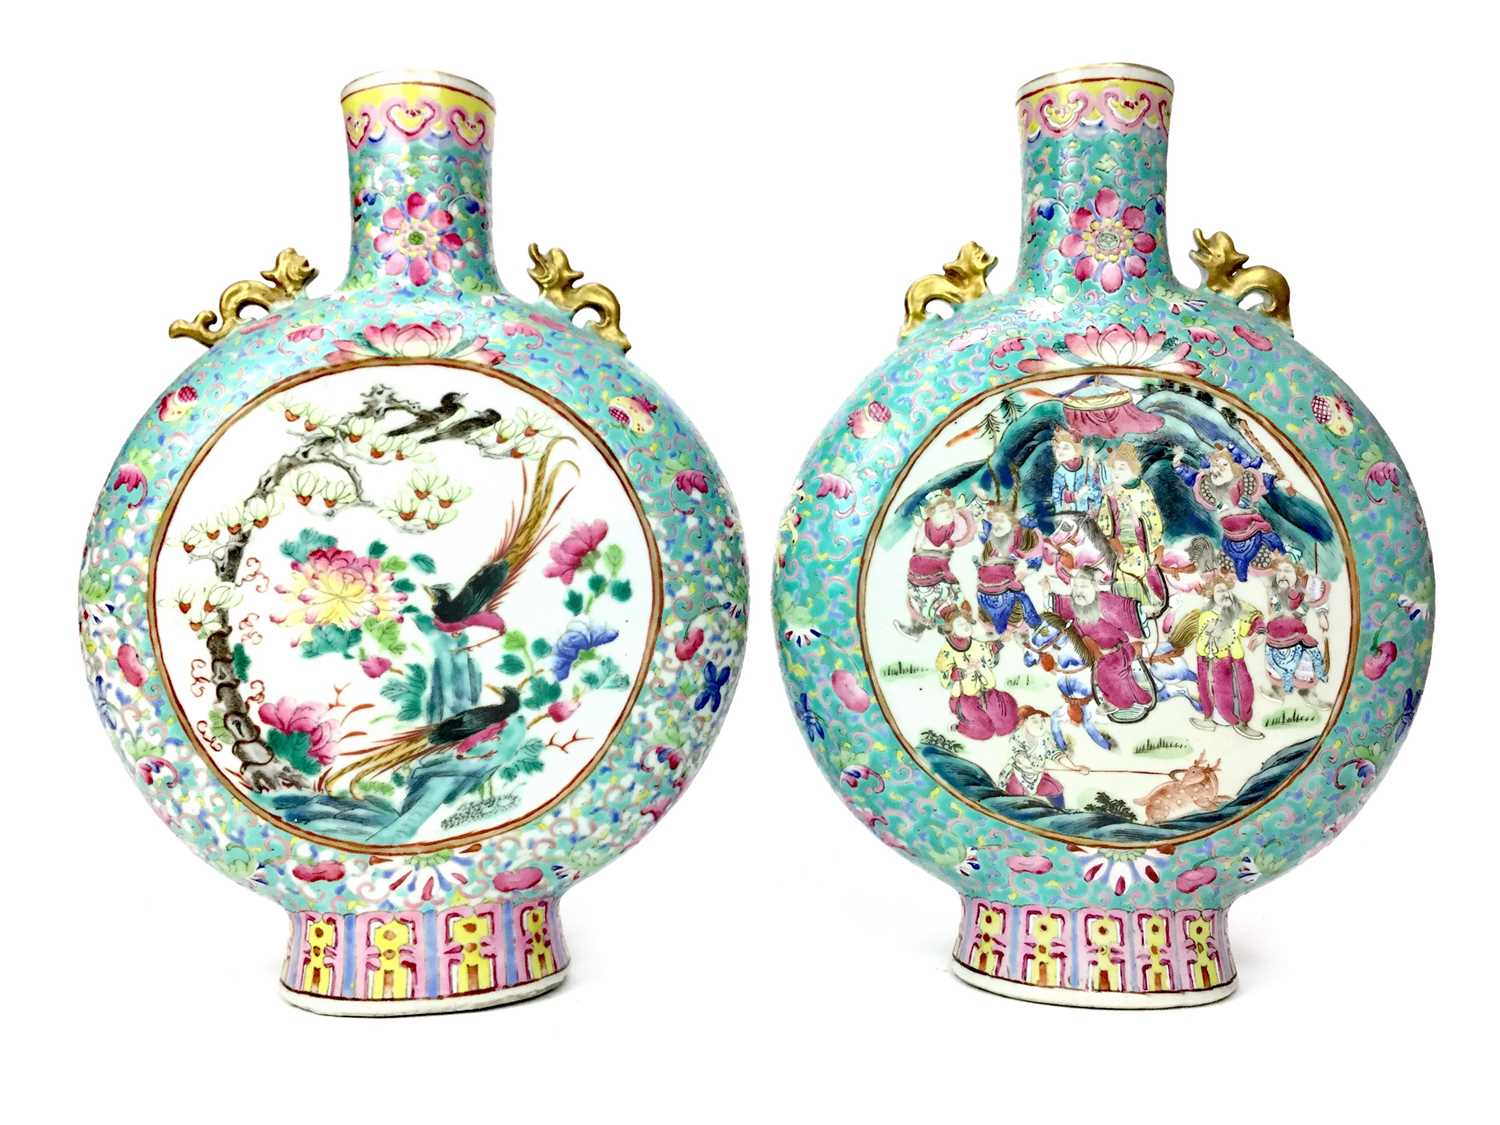 Lot 708 - A PAIR OF EARLY 20TH CENTURY CHINESE MOON FLASK VASES